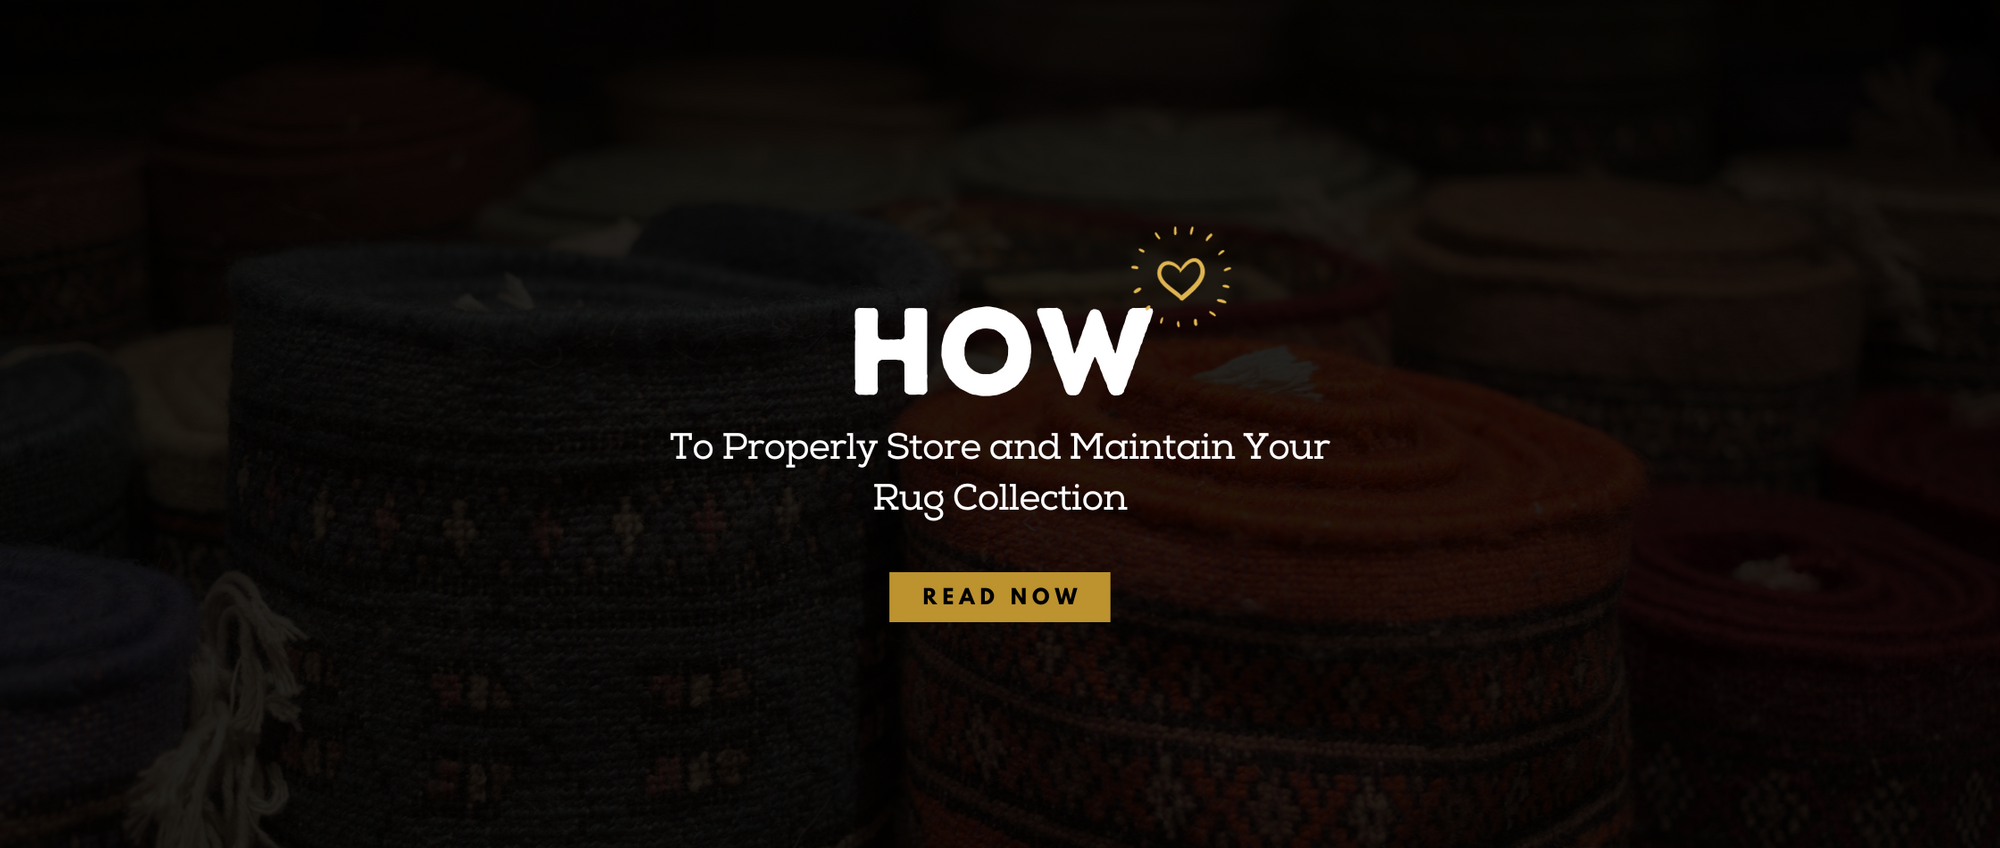 How to Properly Store and Maintain Your Rug Collection